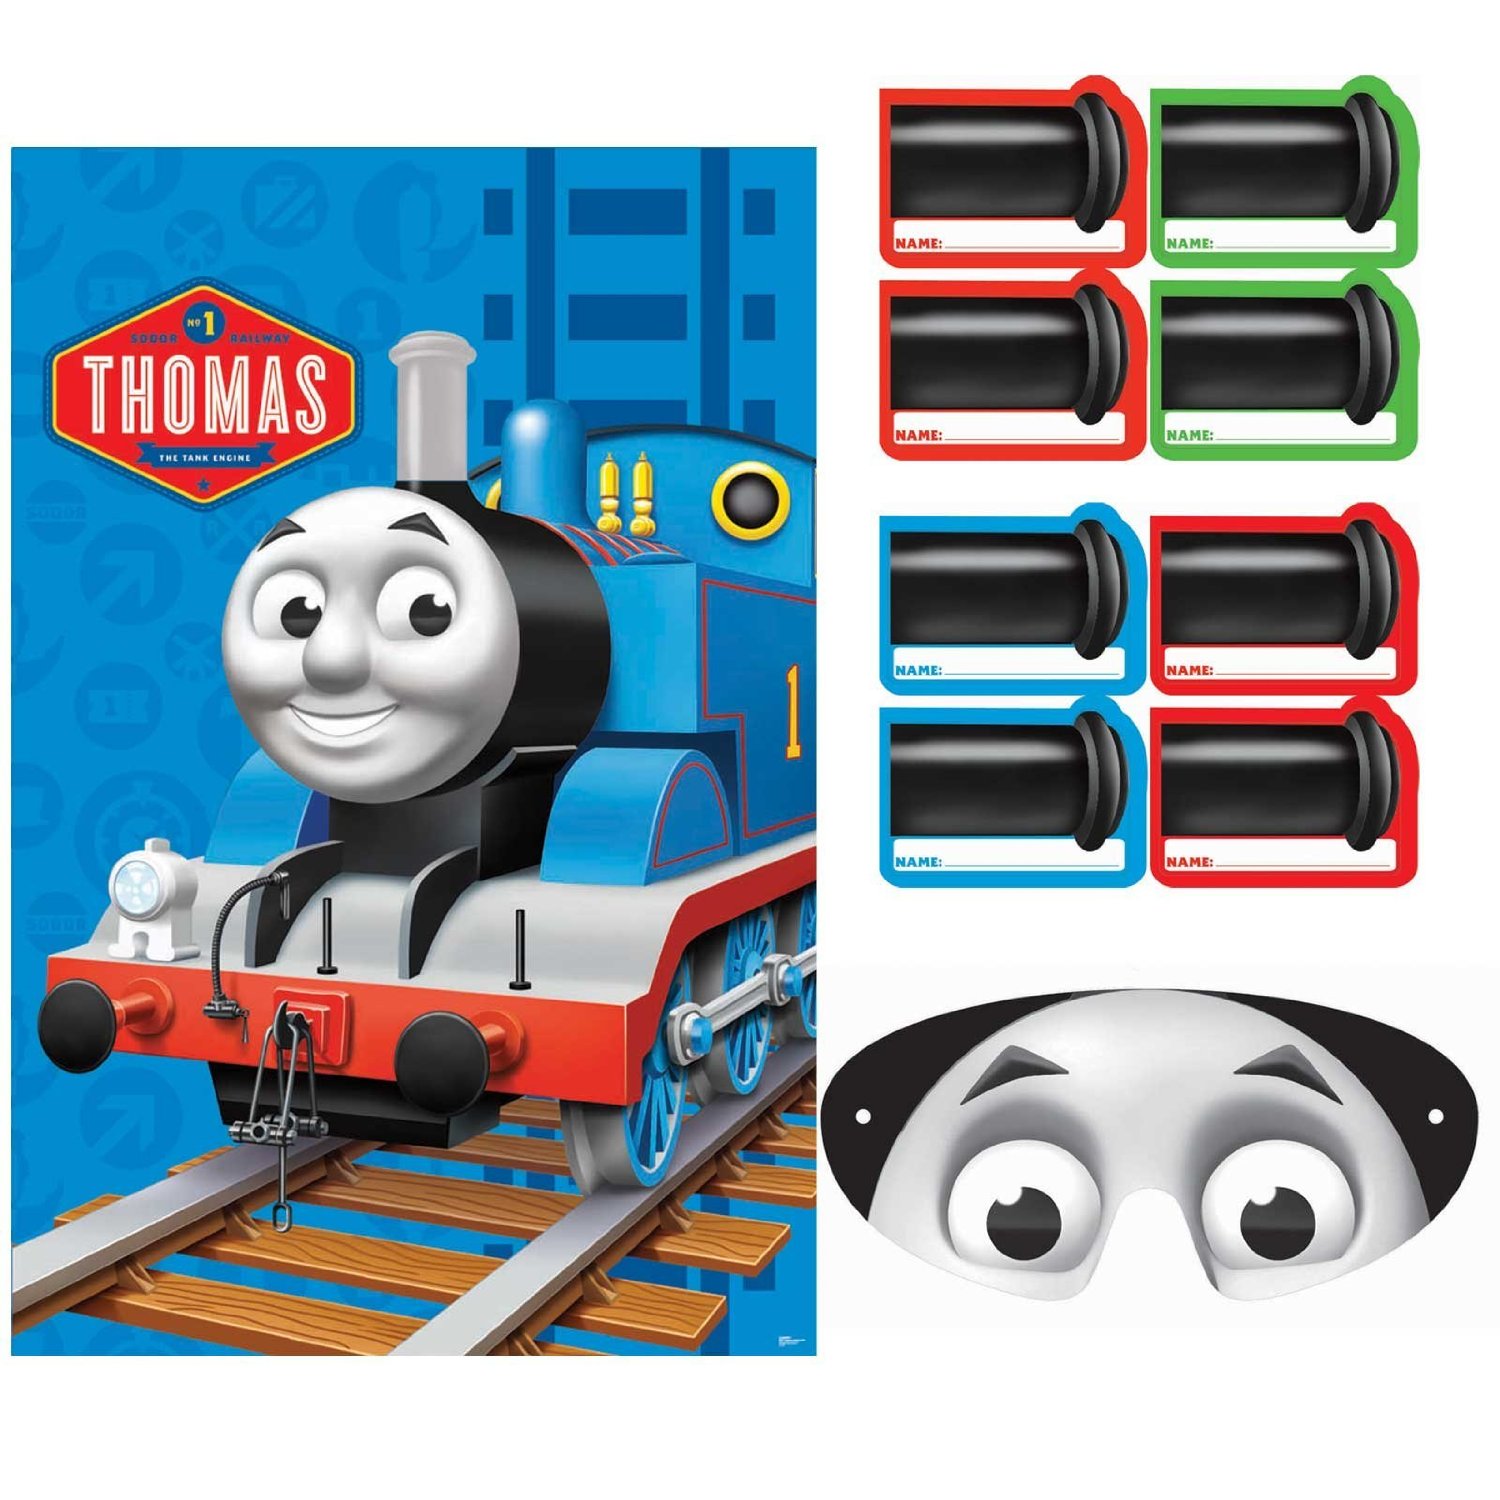 Thomas The Train Games And Pictures 19